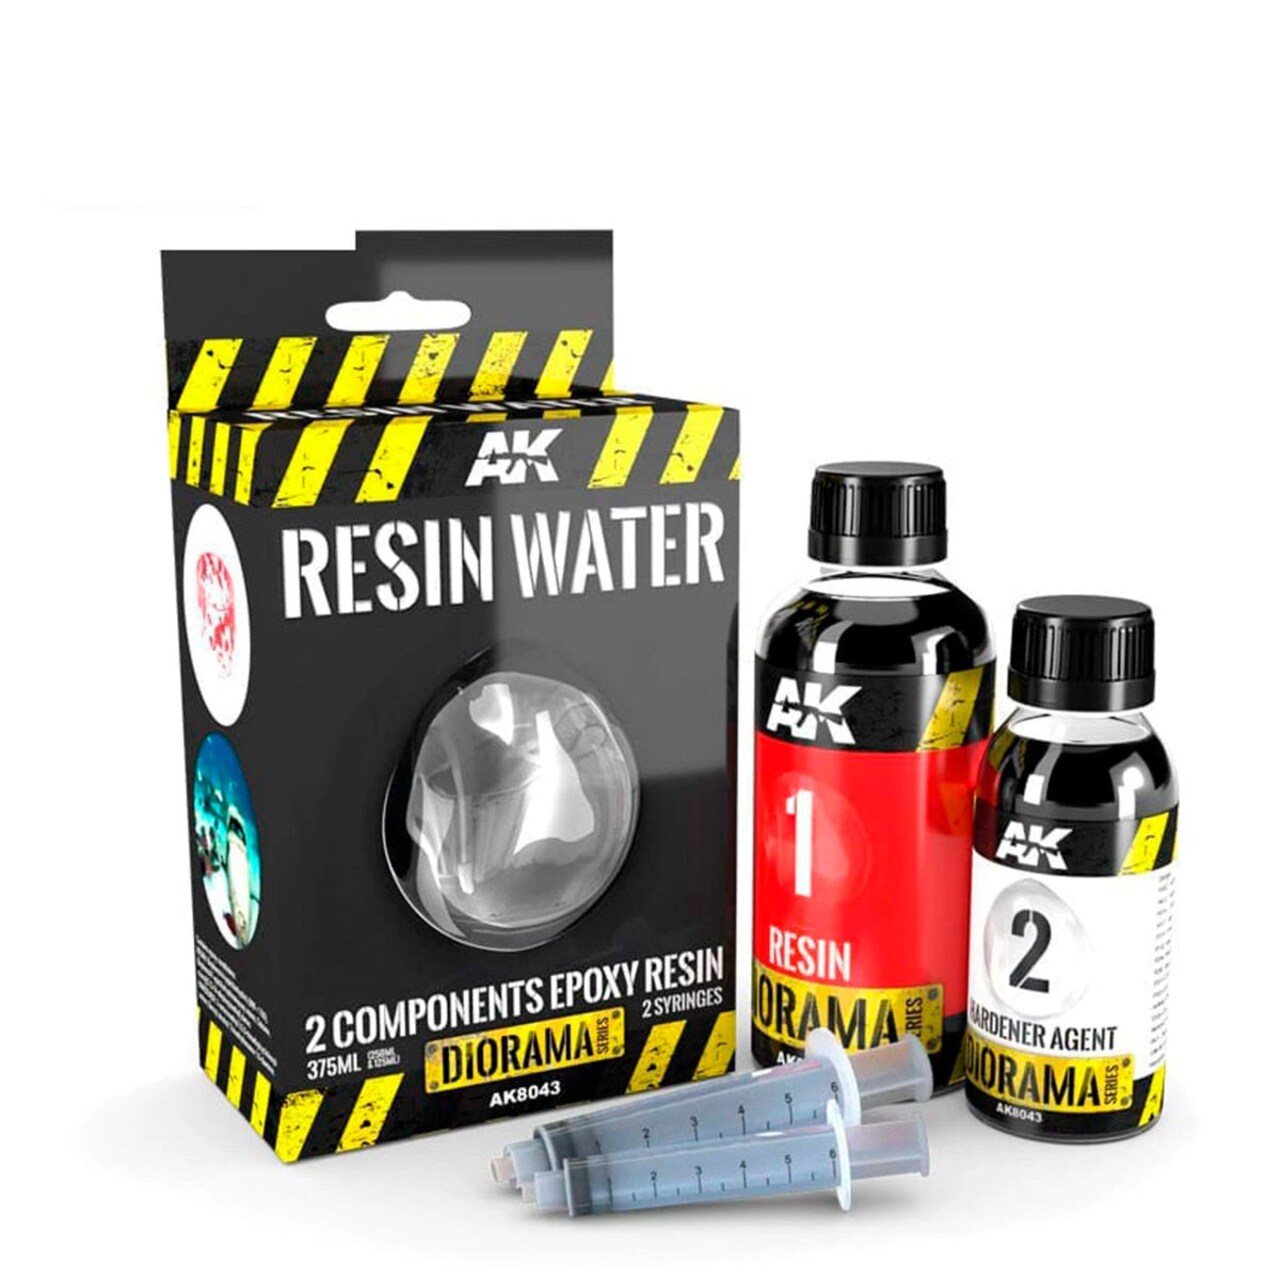 What Is Two-part Epoxy Resin?